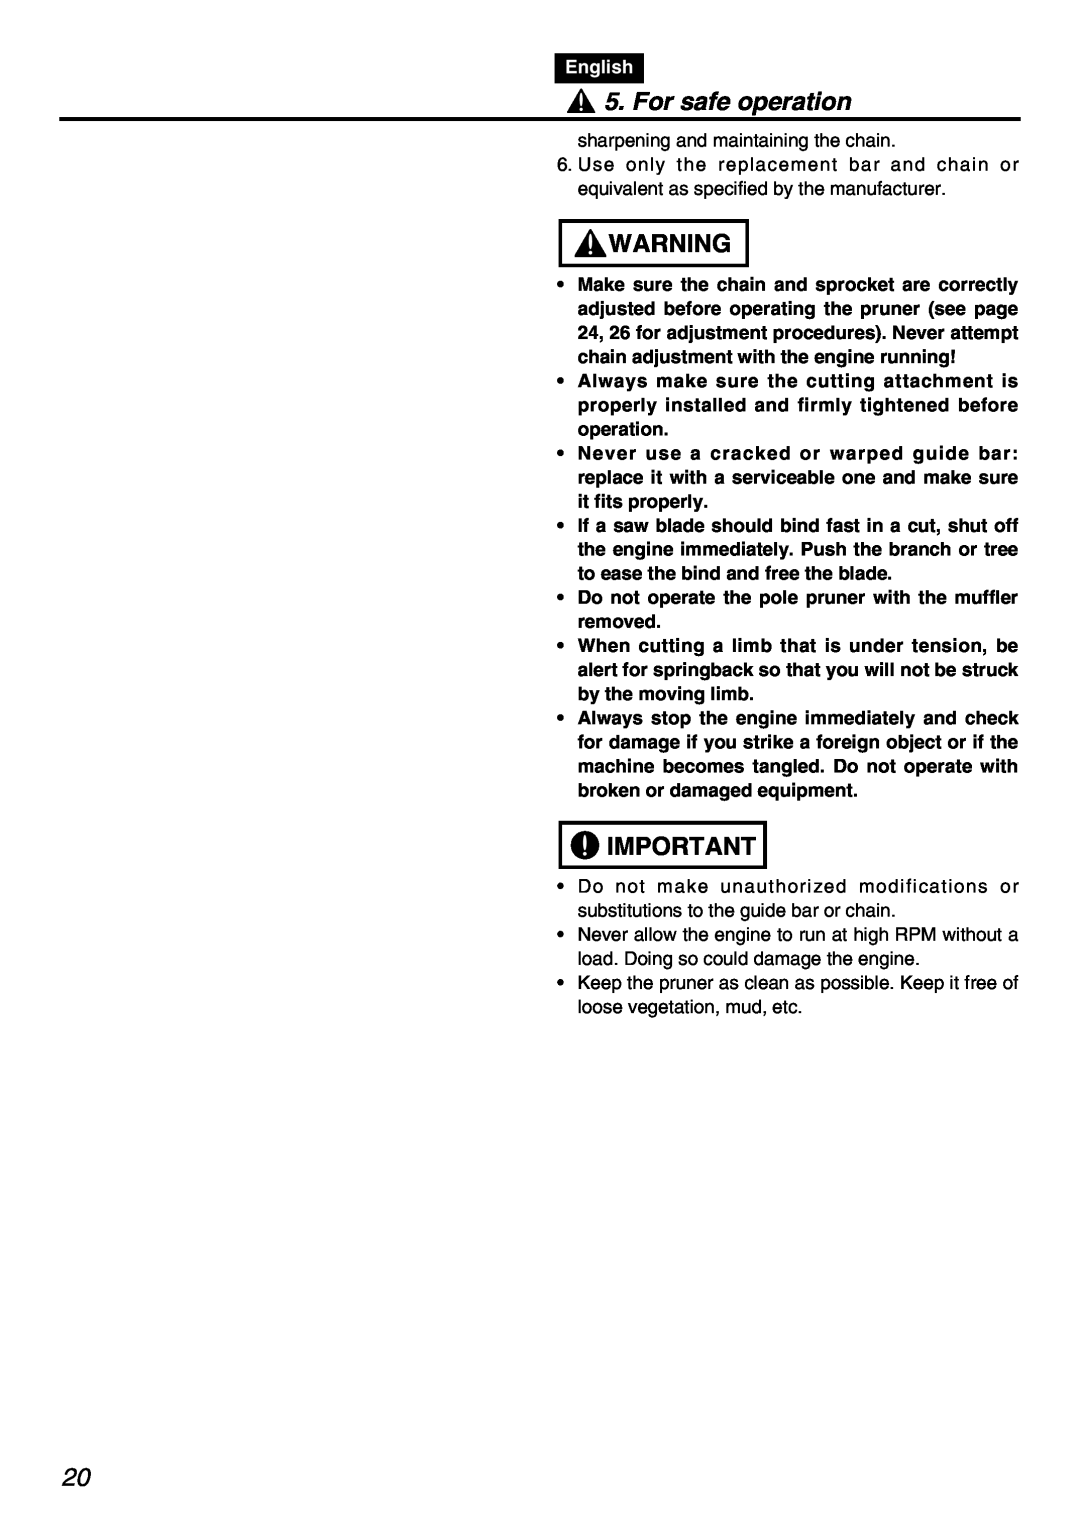 Zenoah PSZ2401 manual For safe operation, English, Do not operate the pole pruner with the muffler removed 